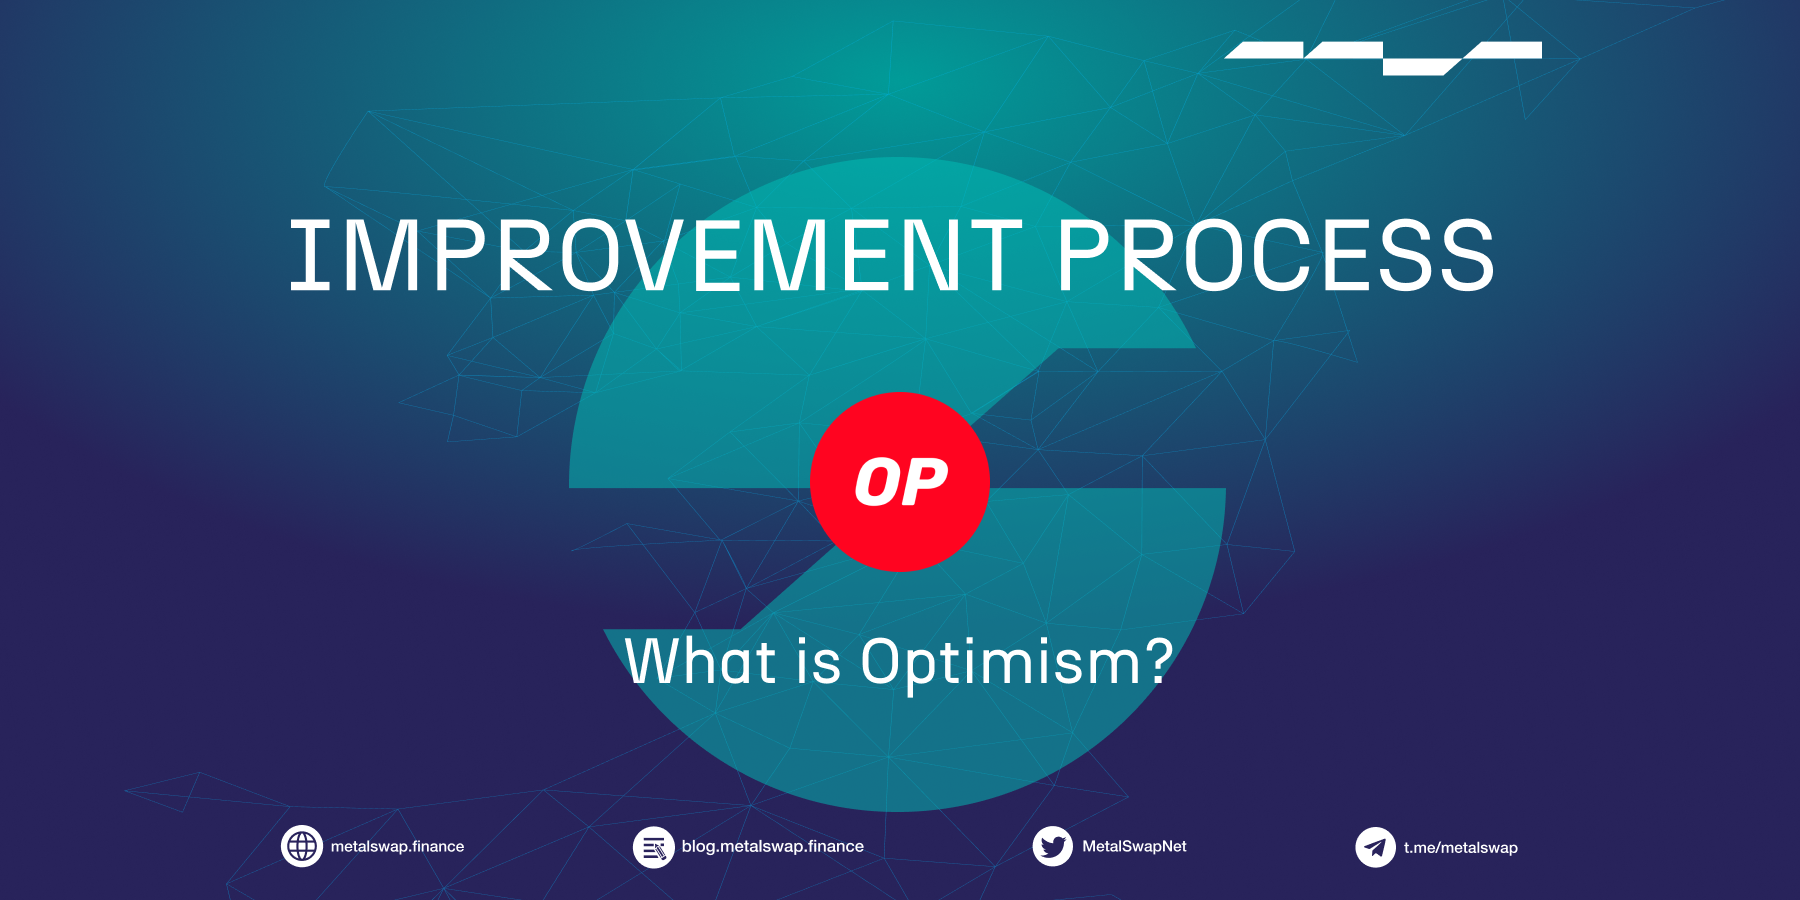 What is optimism